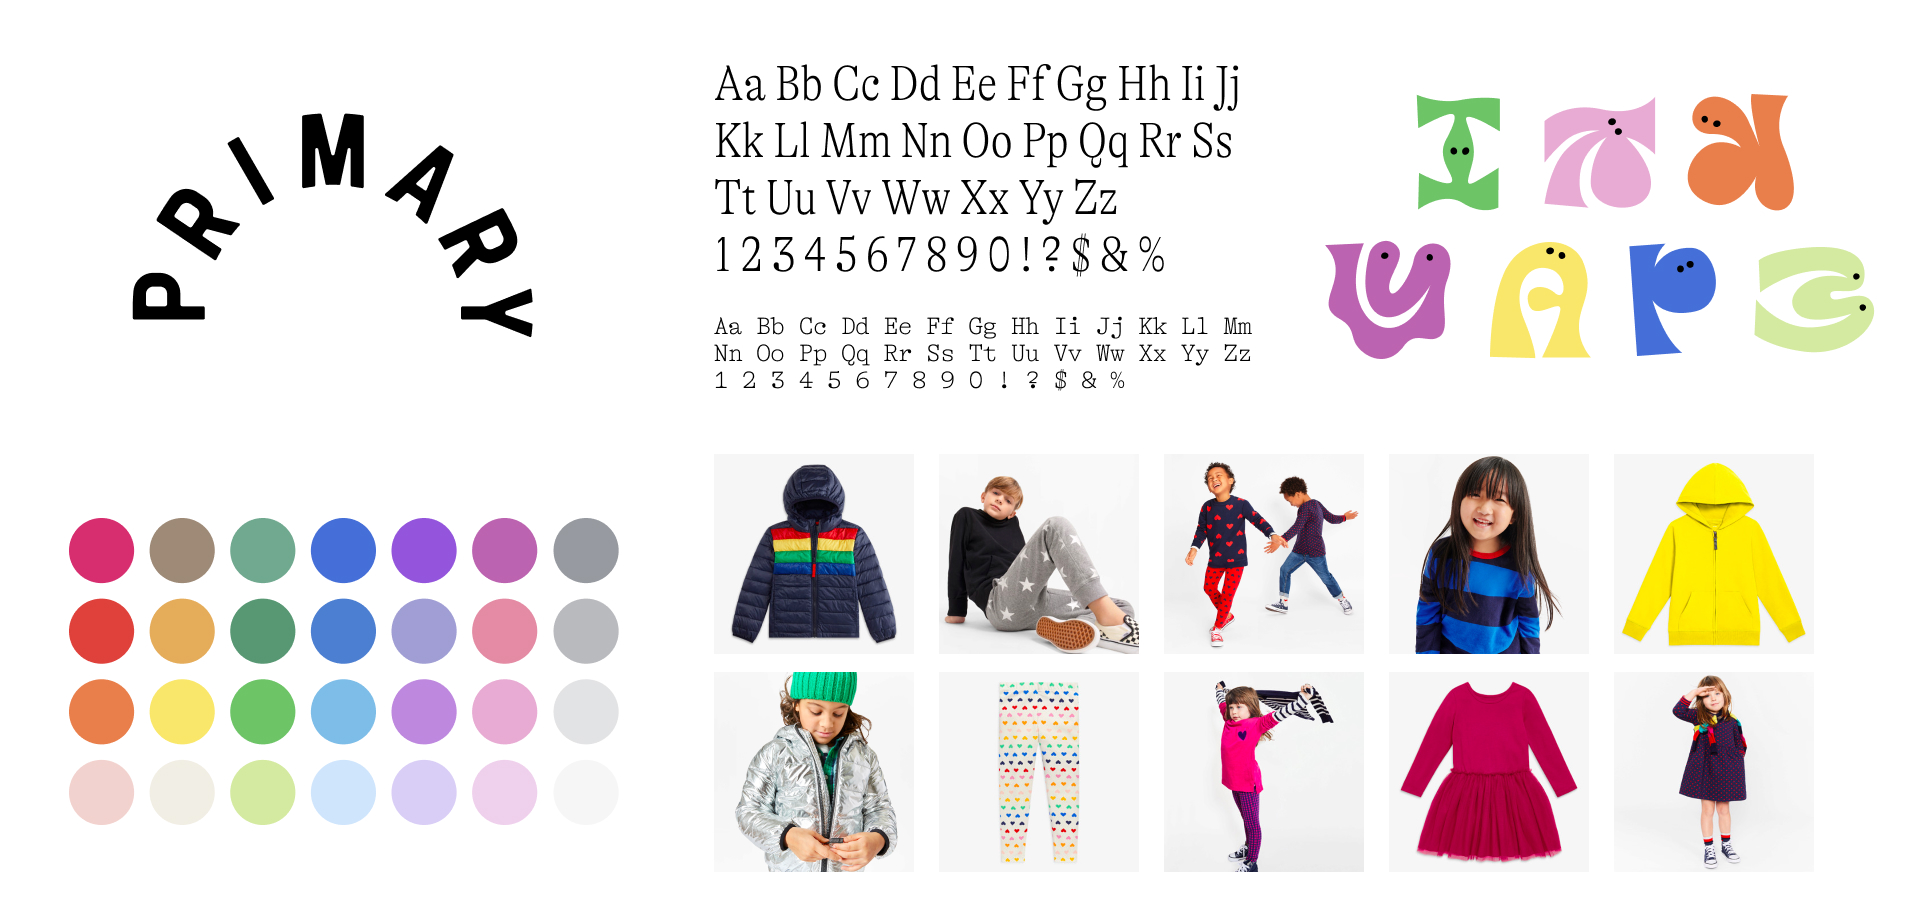 Moodboard of the new logo with the new colors, example photography, new typeface, and new illustration characters.